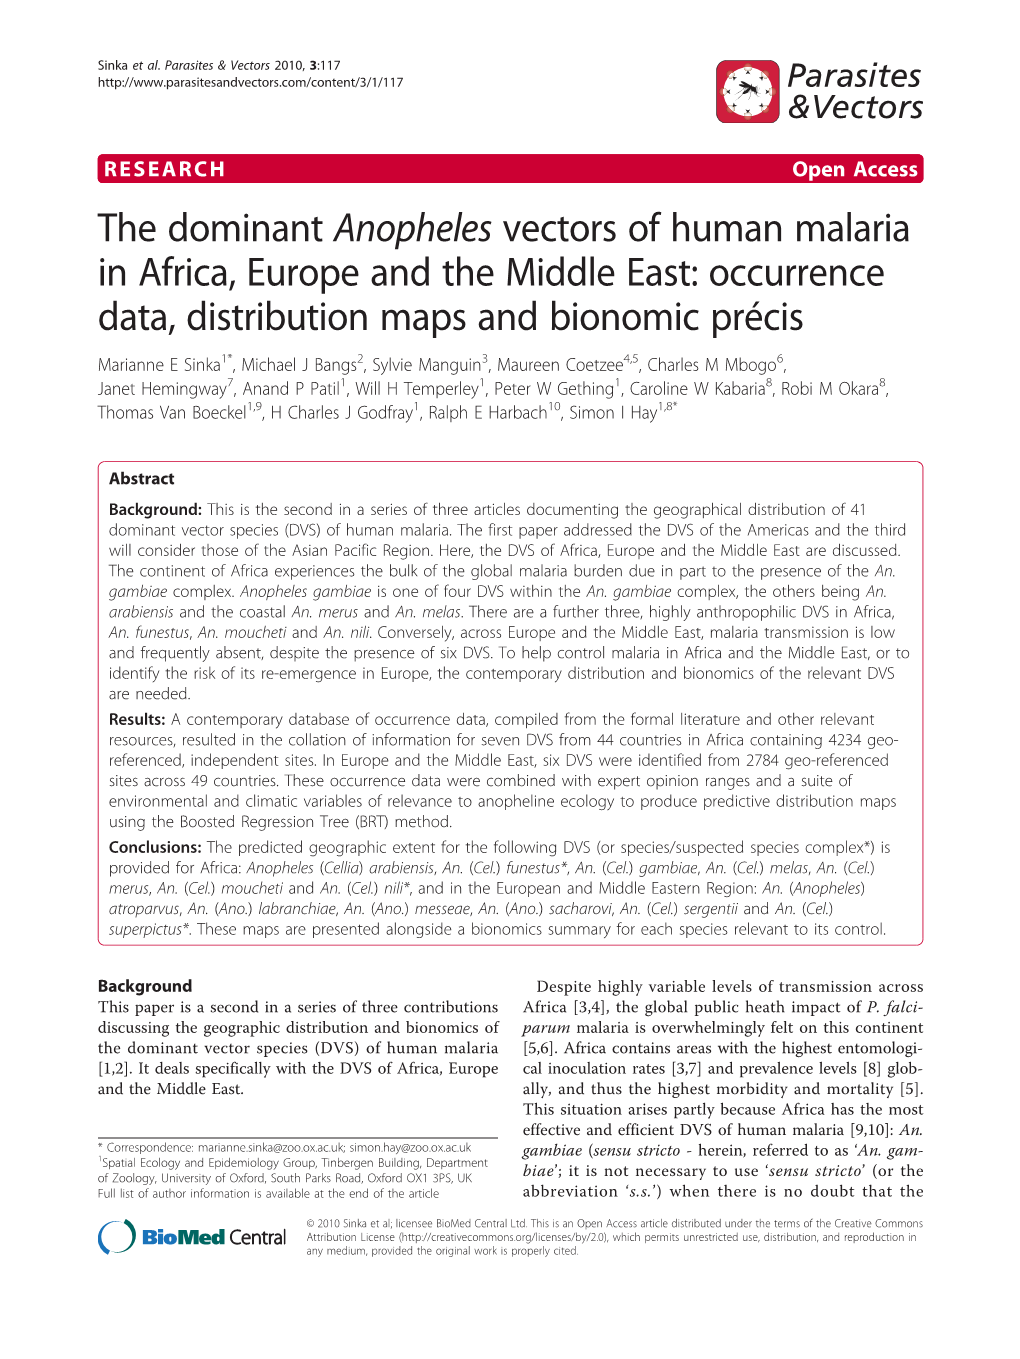 The Dominant Anopheles Vectors of Human Malaria in Africa, Europe